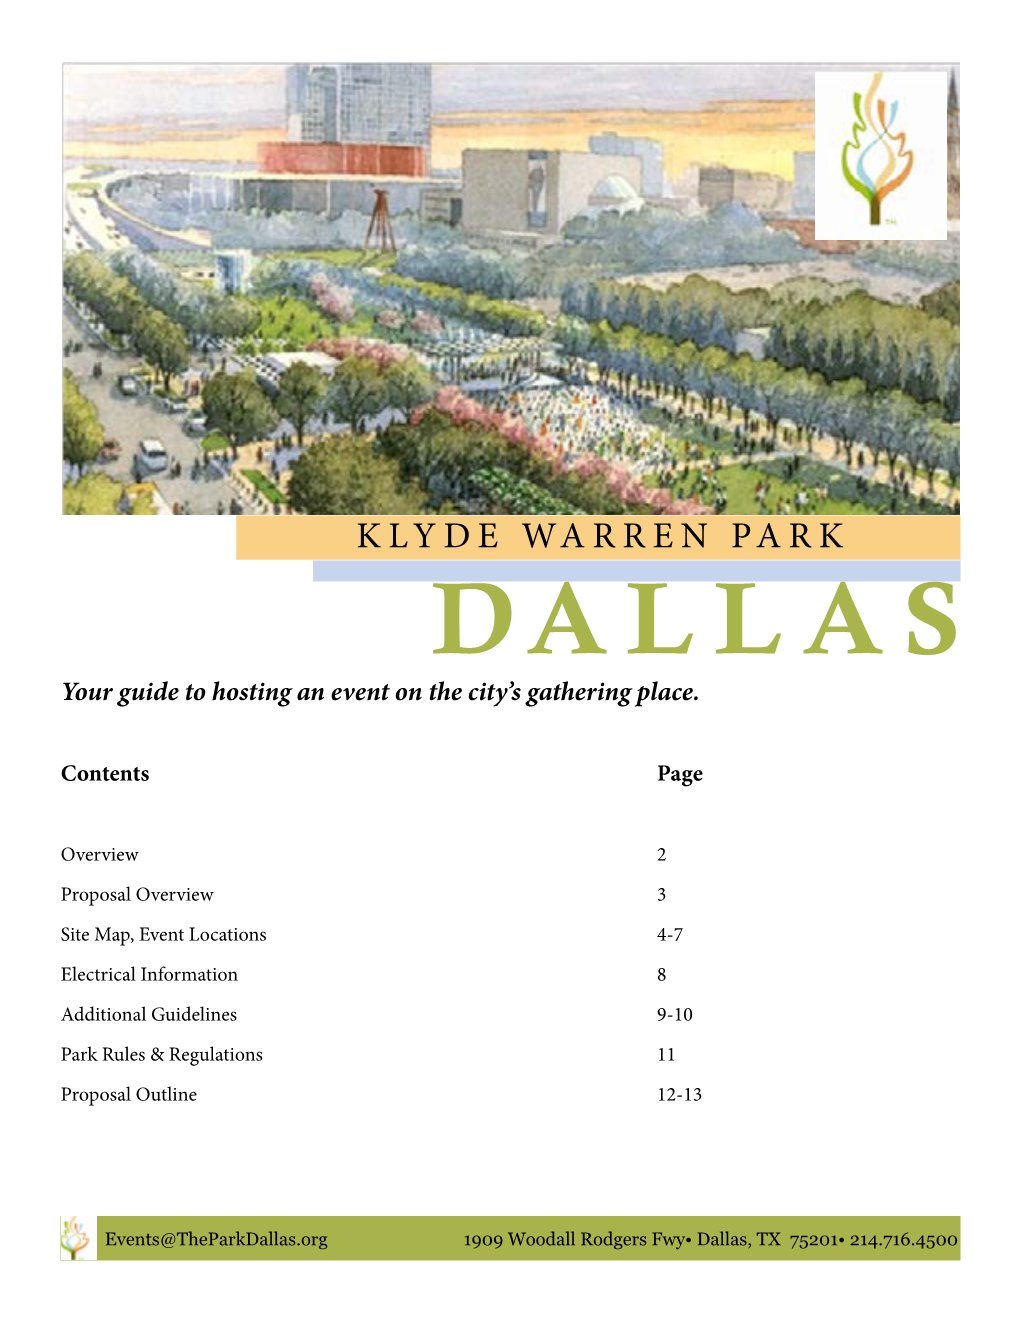 DALLAS Your Guide to Hosting an Event on the City’S Gathering Place